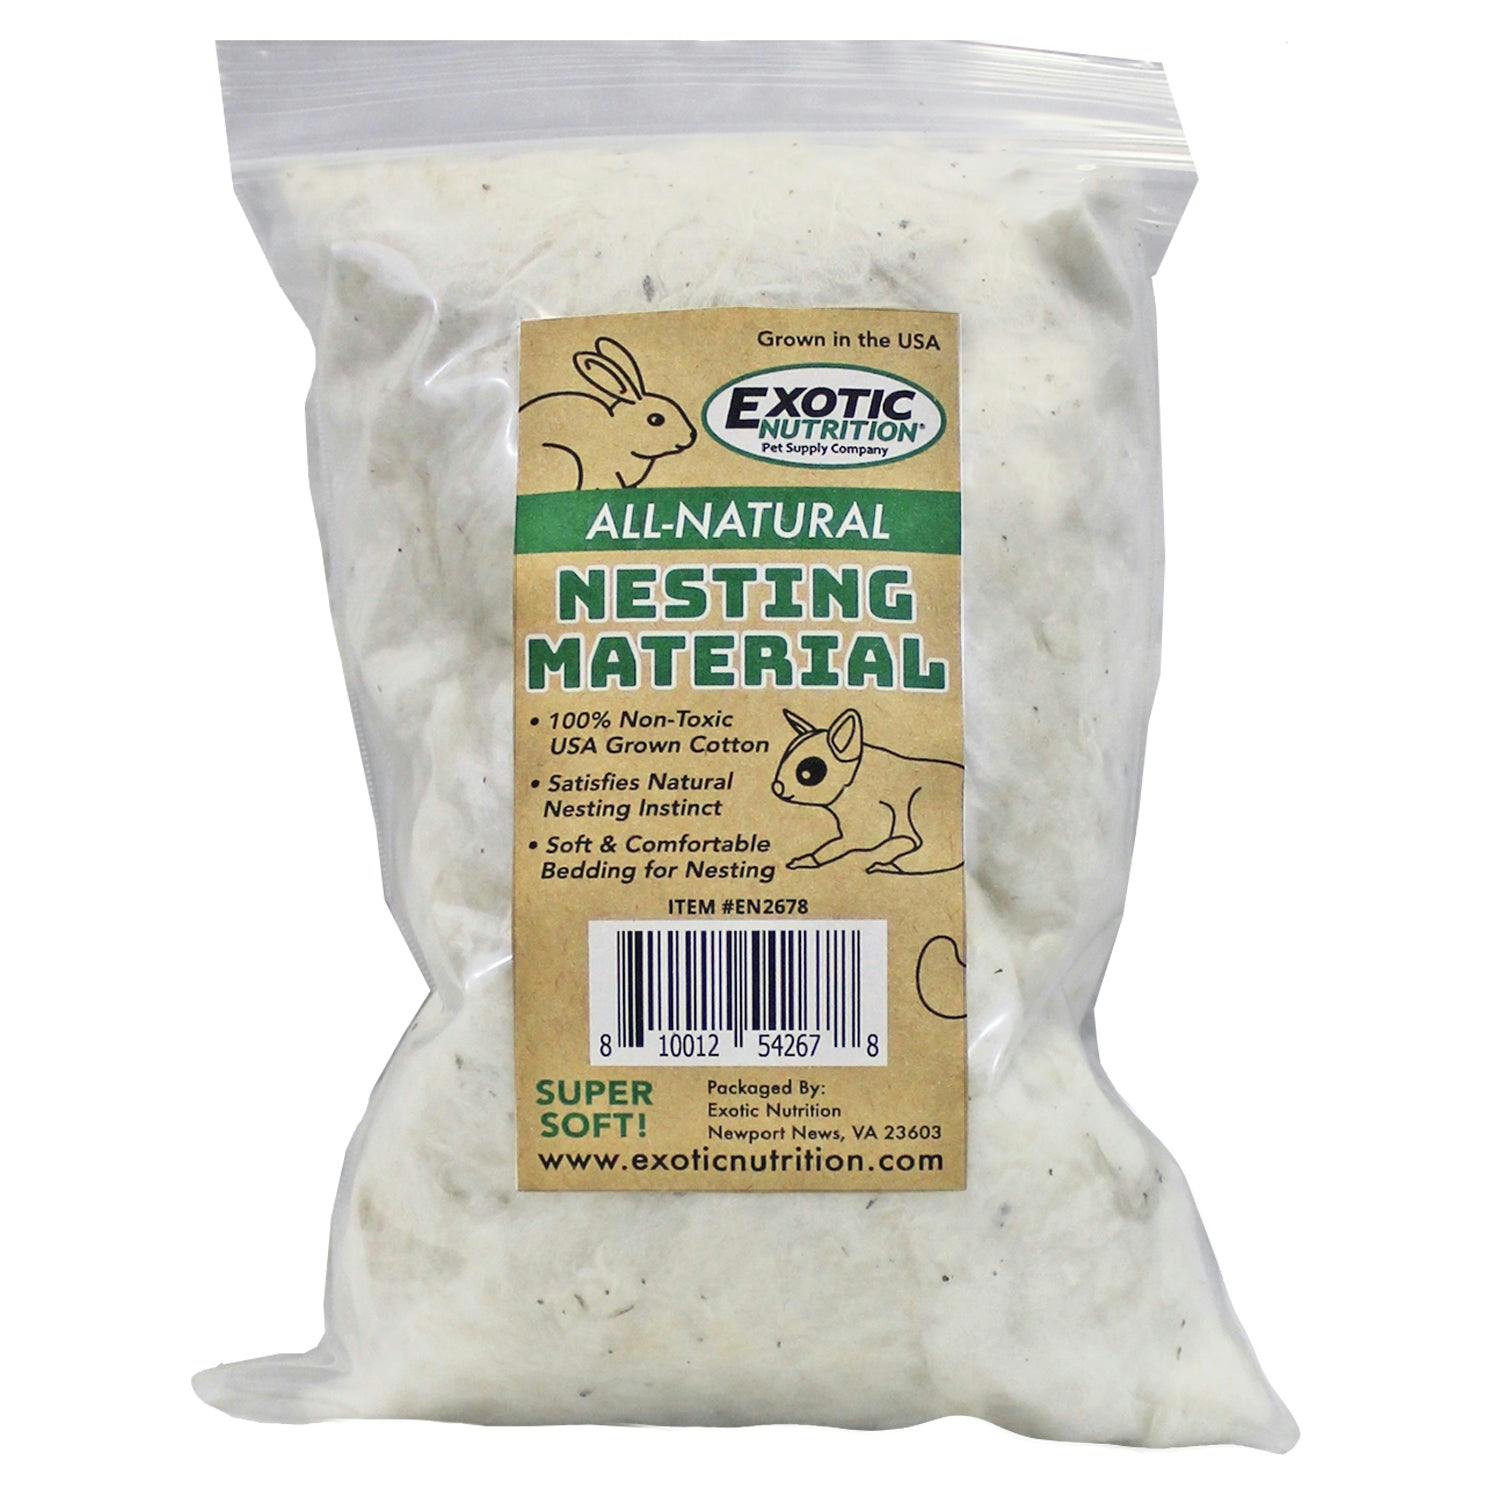 All-Natural Nesting Material - Image 0